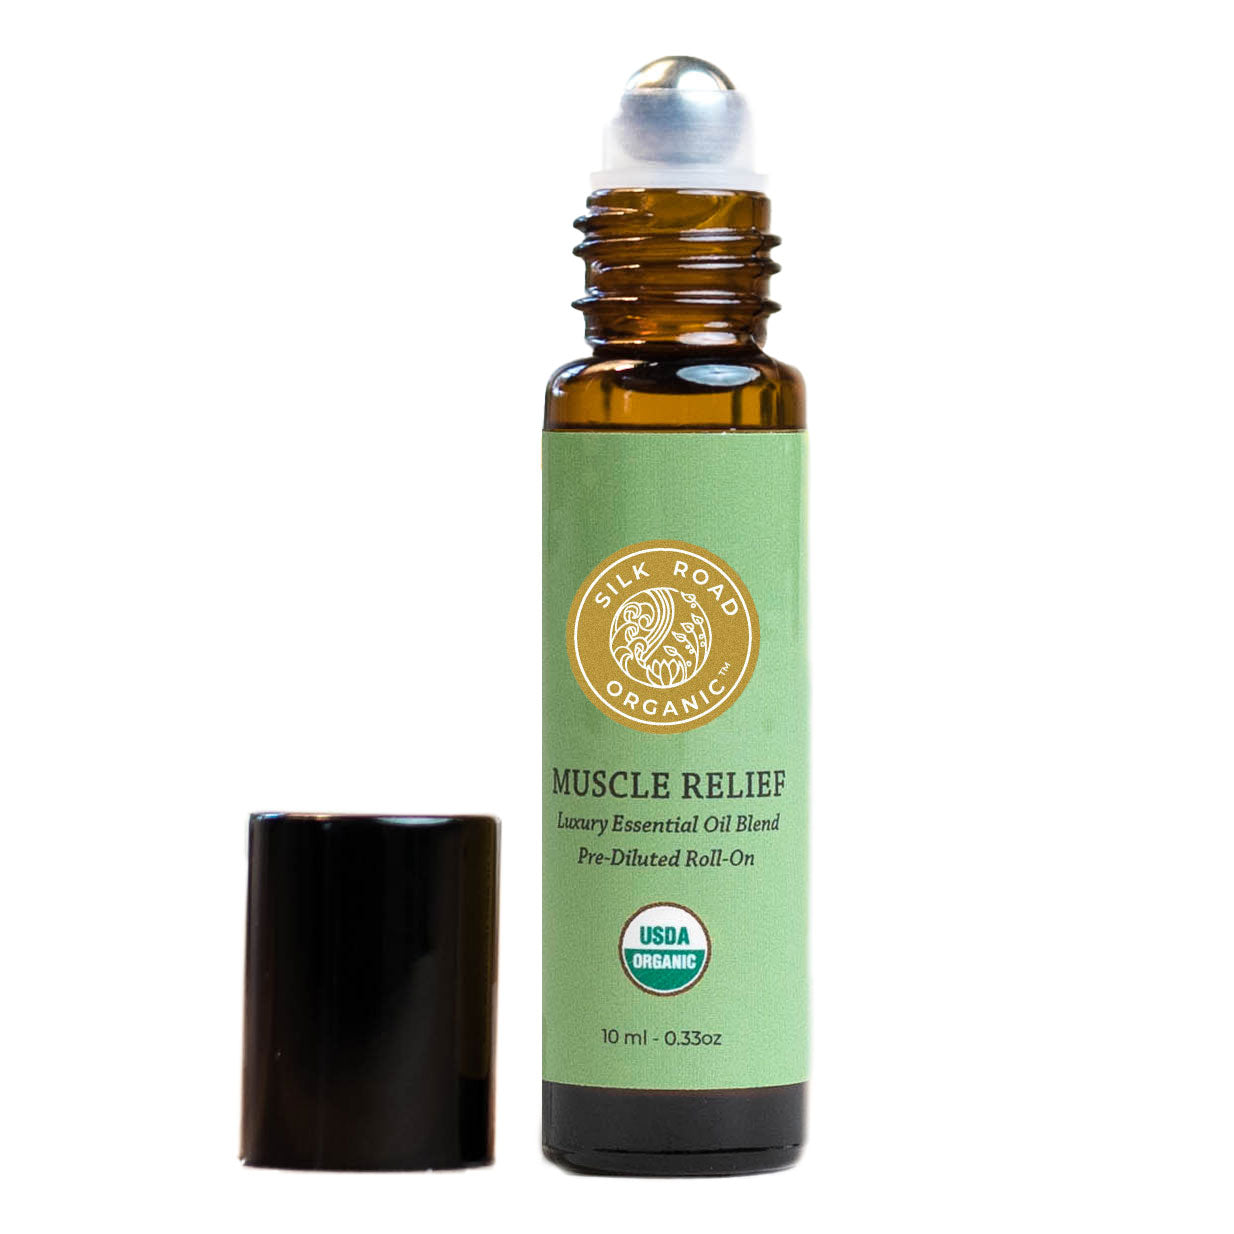 muscle relief essential oil blend deep relieves soreness pain silk road organic